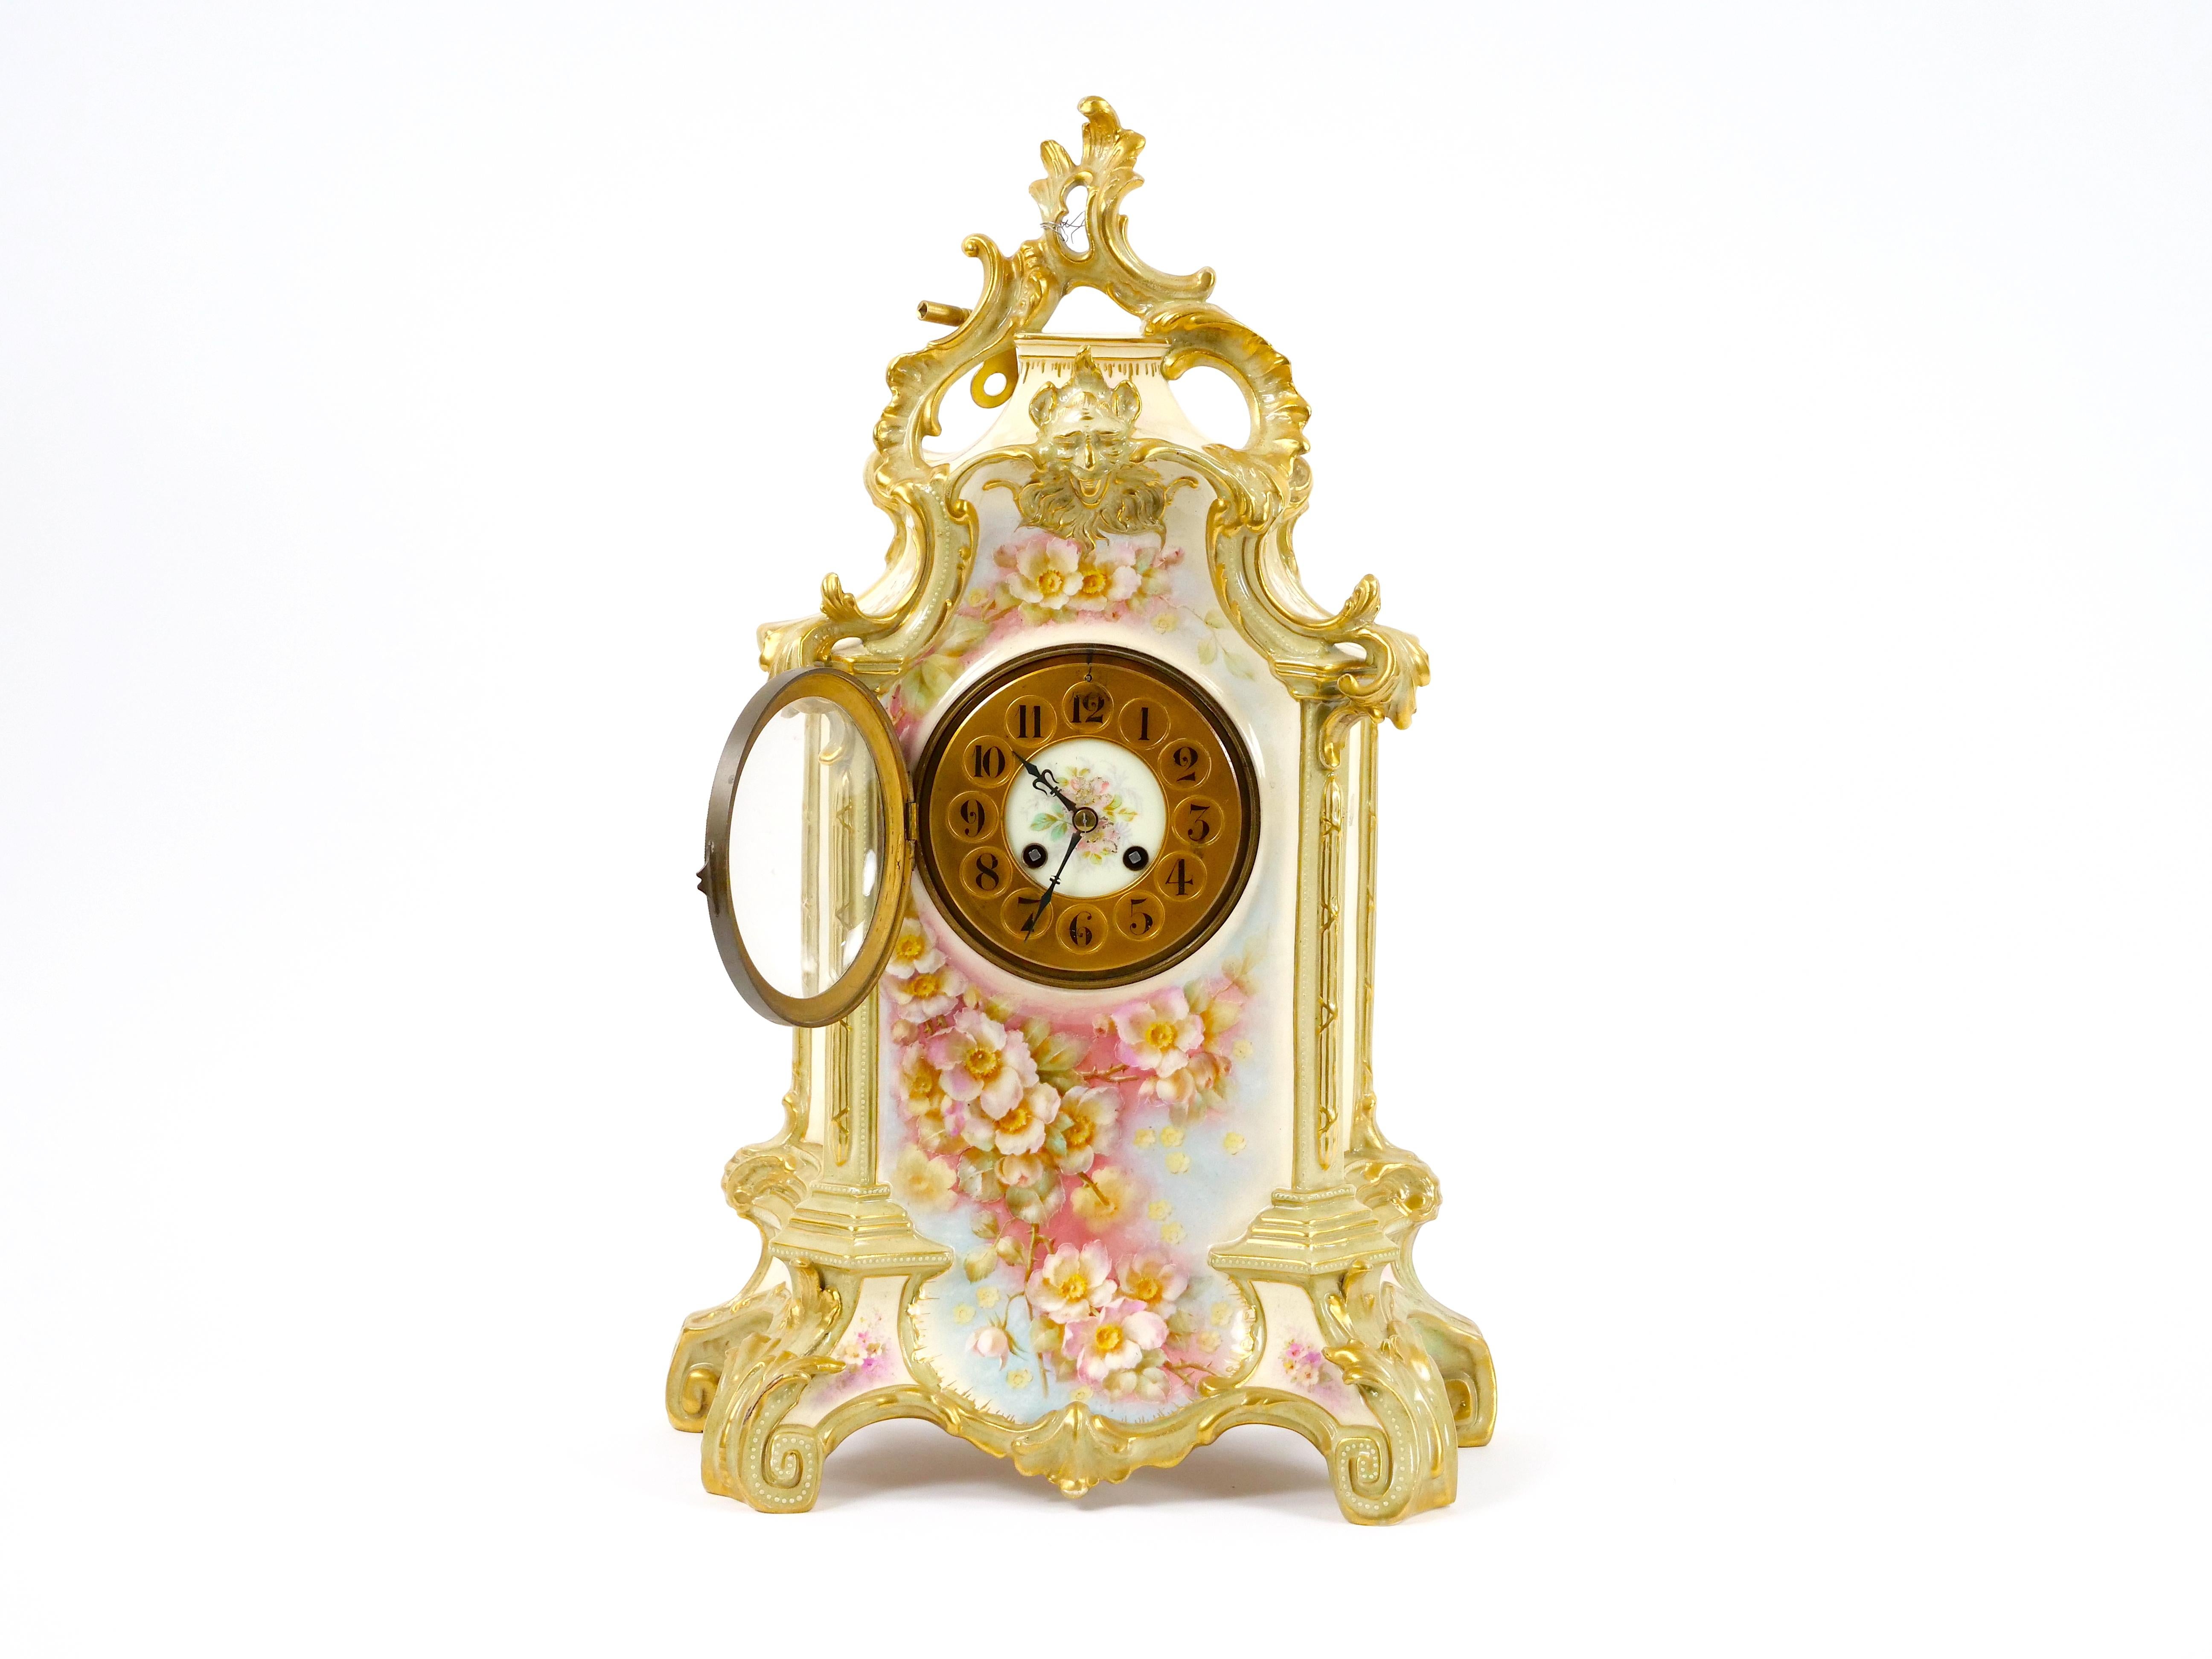 Elevate your decor with this exquisite 19th Century French Hand-Decorated and Gilt Gold Porcelain Mantel Clock, a true masterpiece of artistry and craftsmanship. This mantel clock is a fusion of function and aesthetic beauty, offering a glimpse into